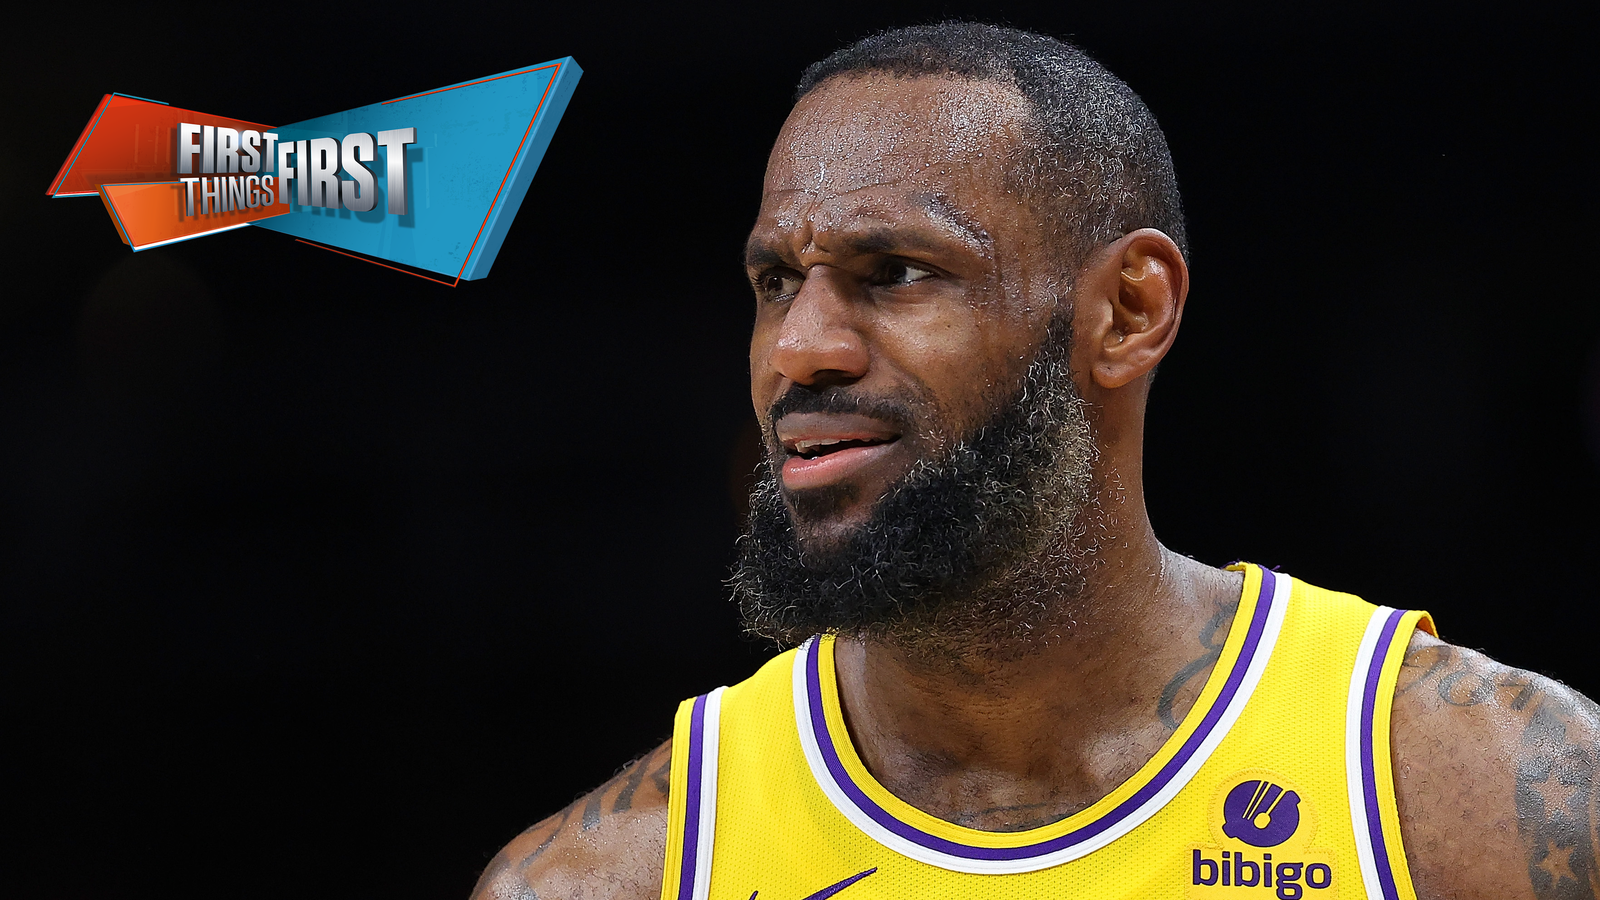 Should LeBron James ask the Lakers for a trade?